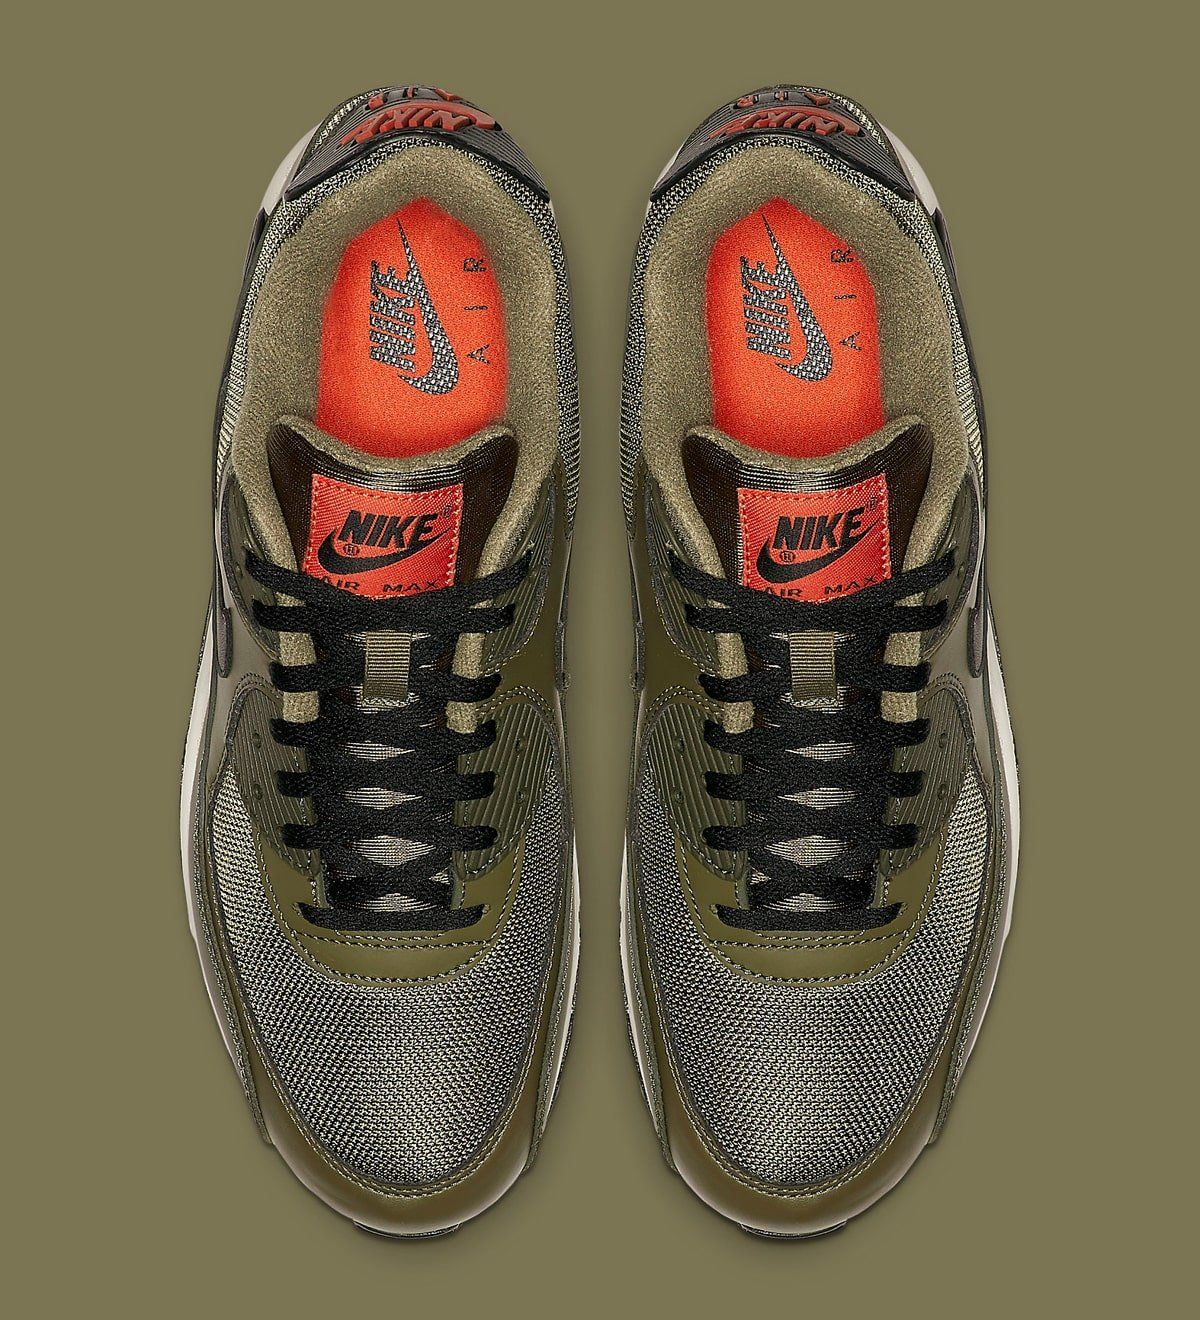 Available Now // Nike's Next Air Max 90 Takes on an Undeniably ...